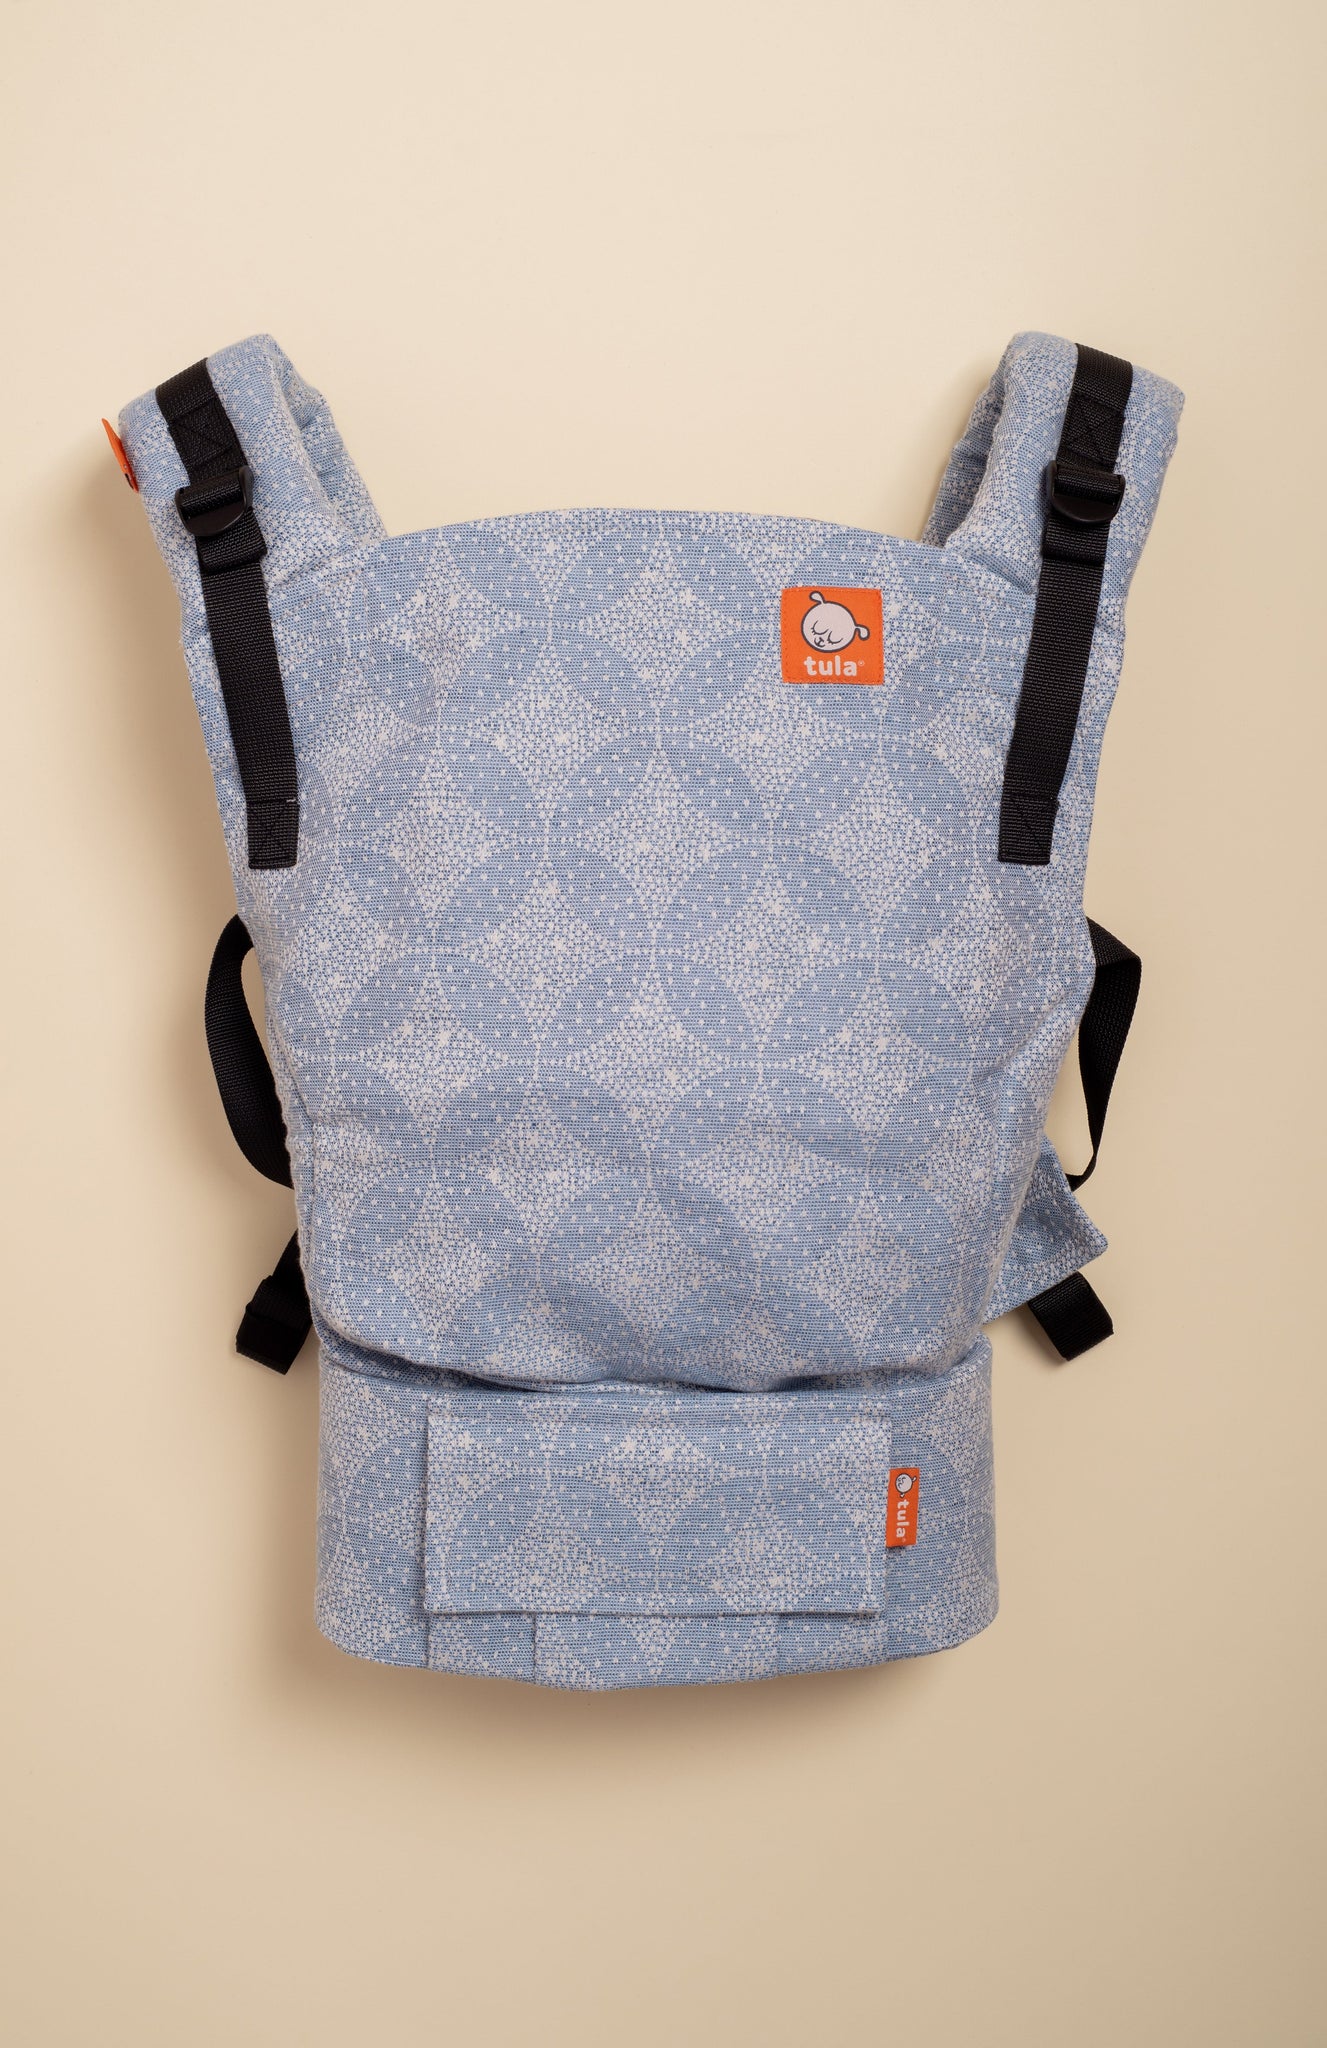 anchors tula baby carrier